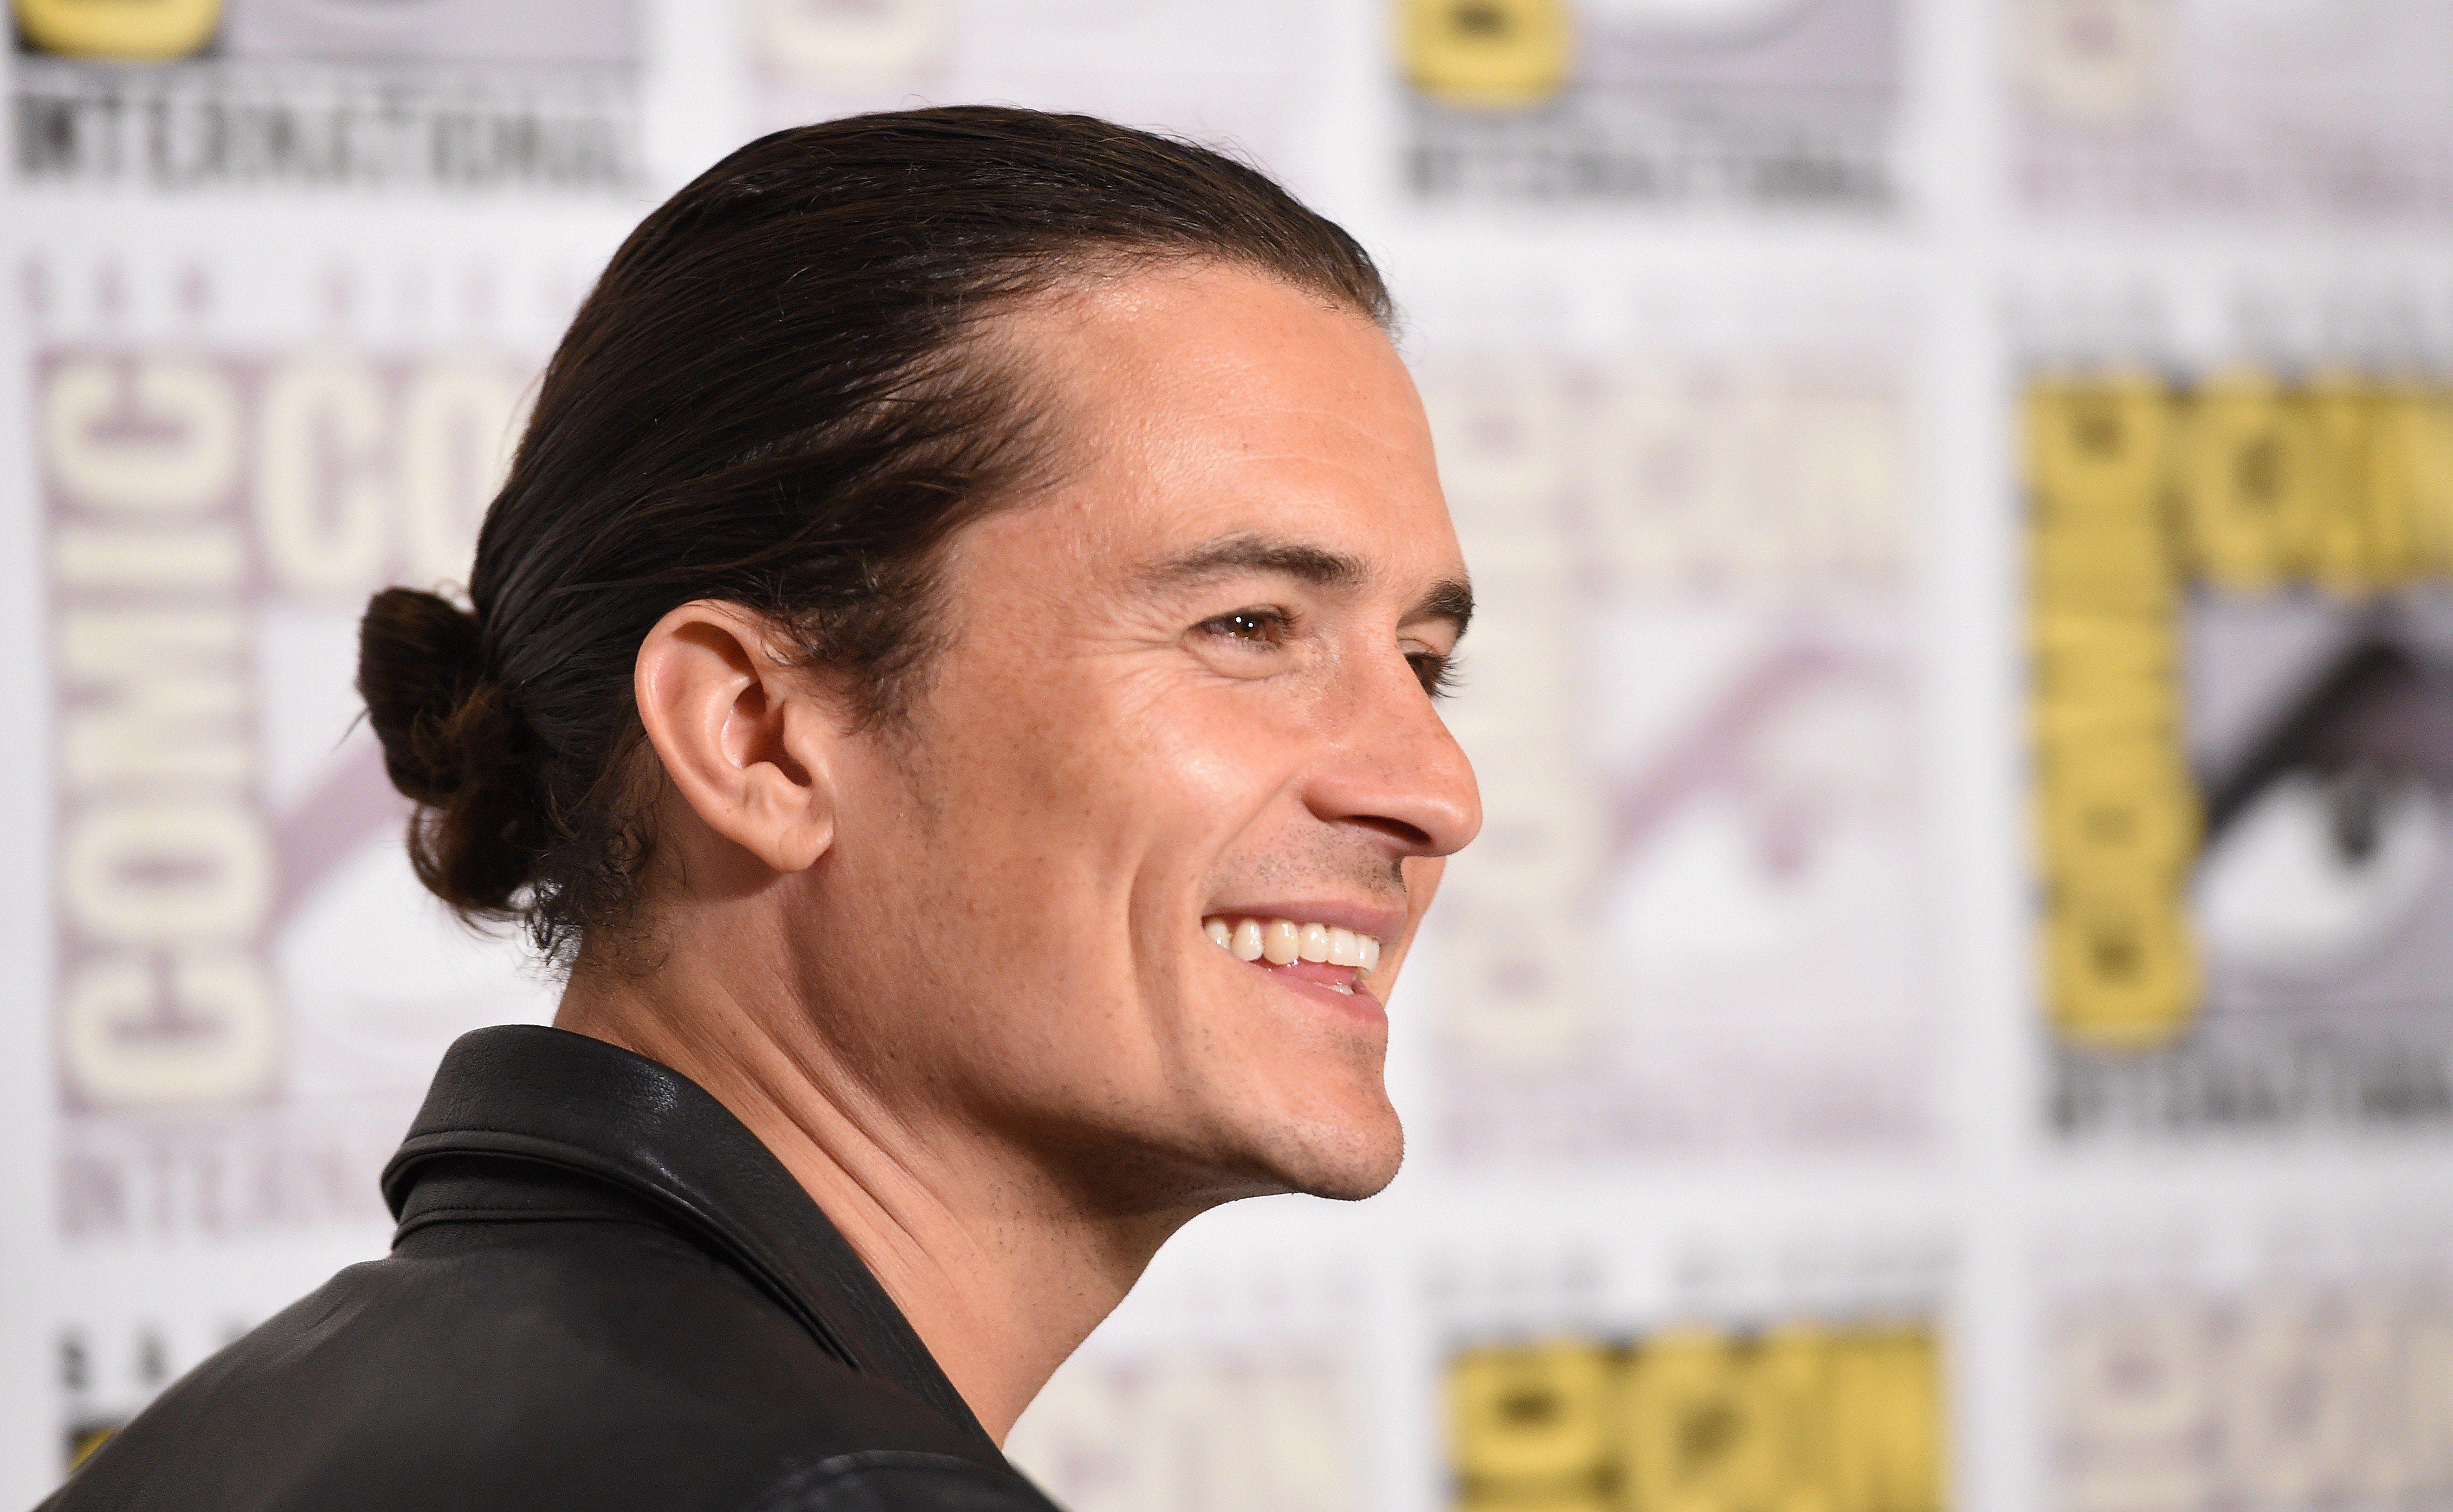 Orlando Bloom Wallpaper Image Photo Picture Background